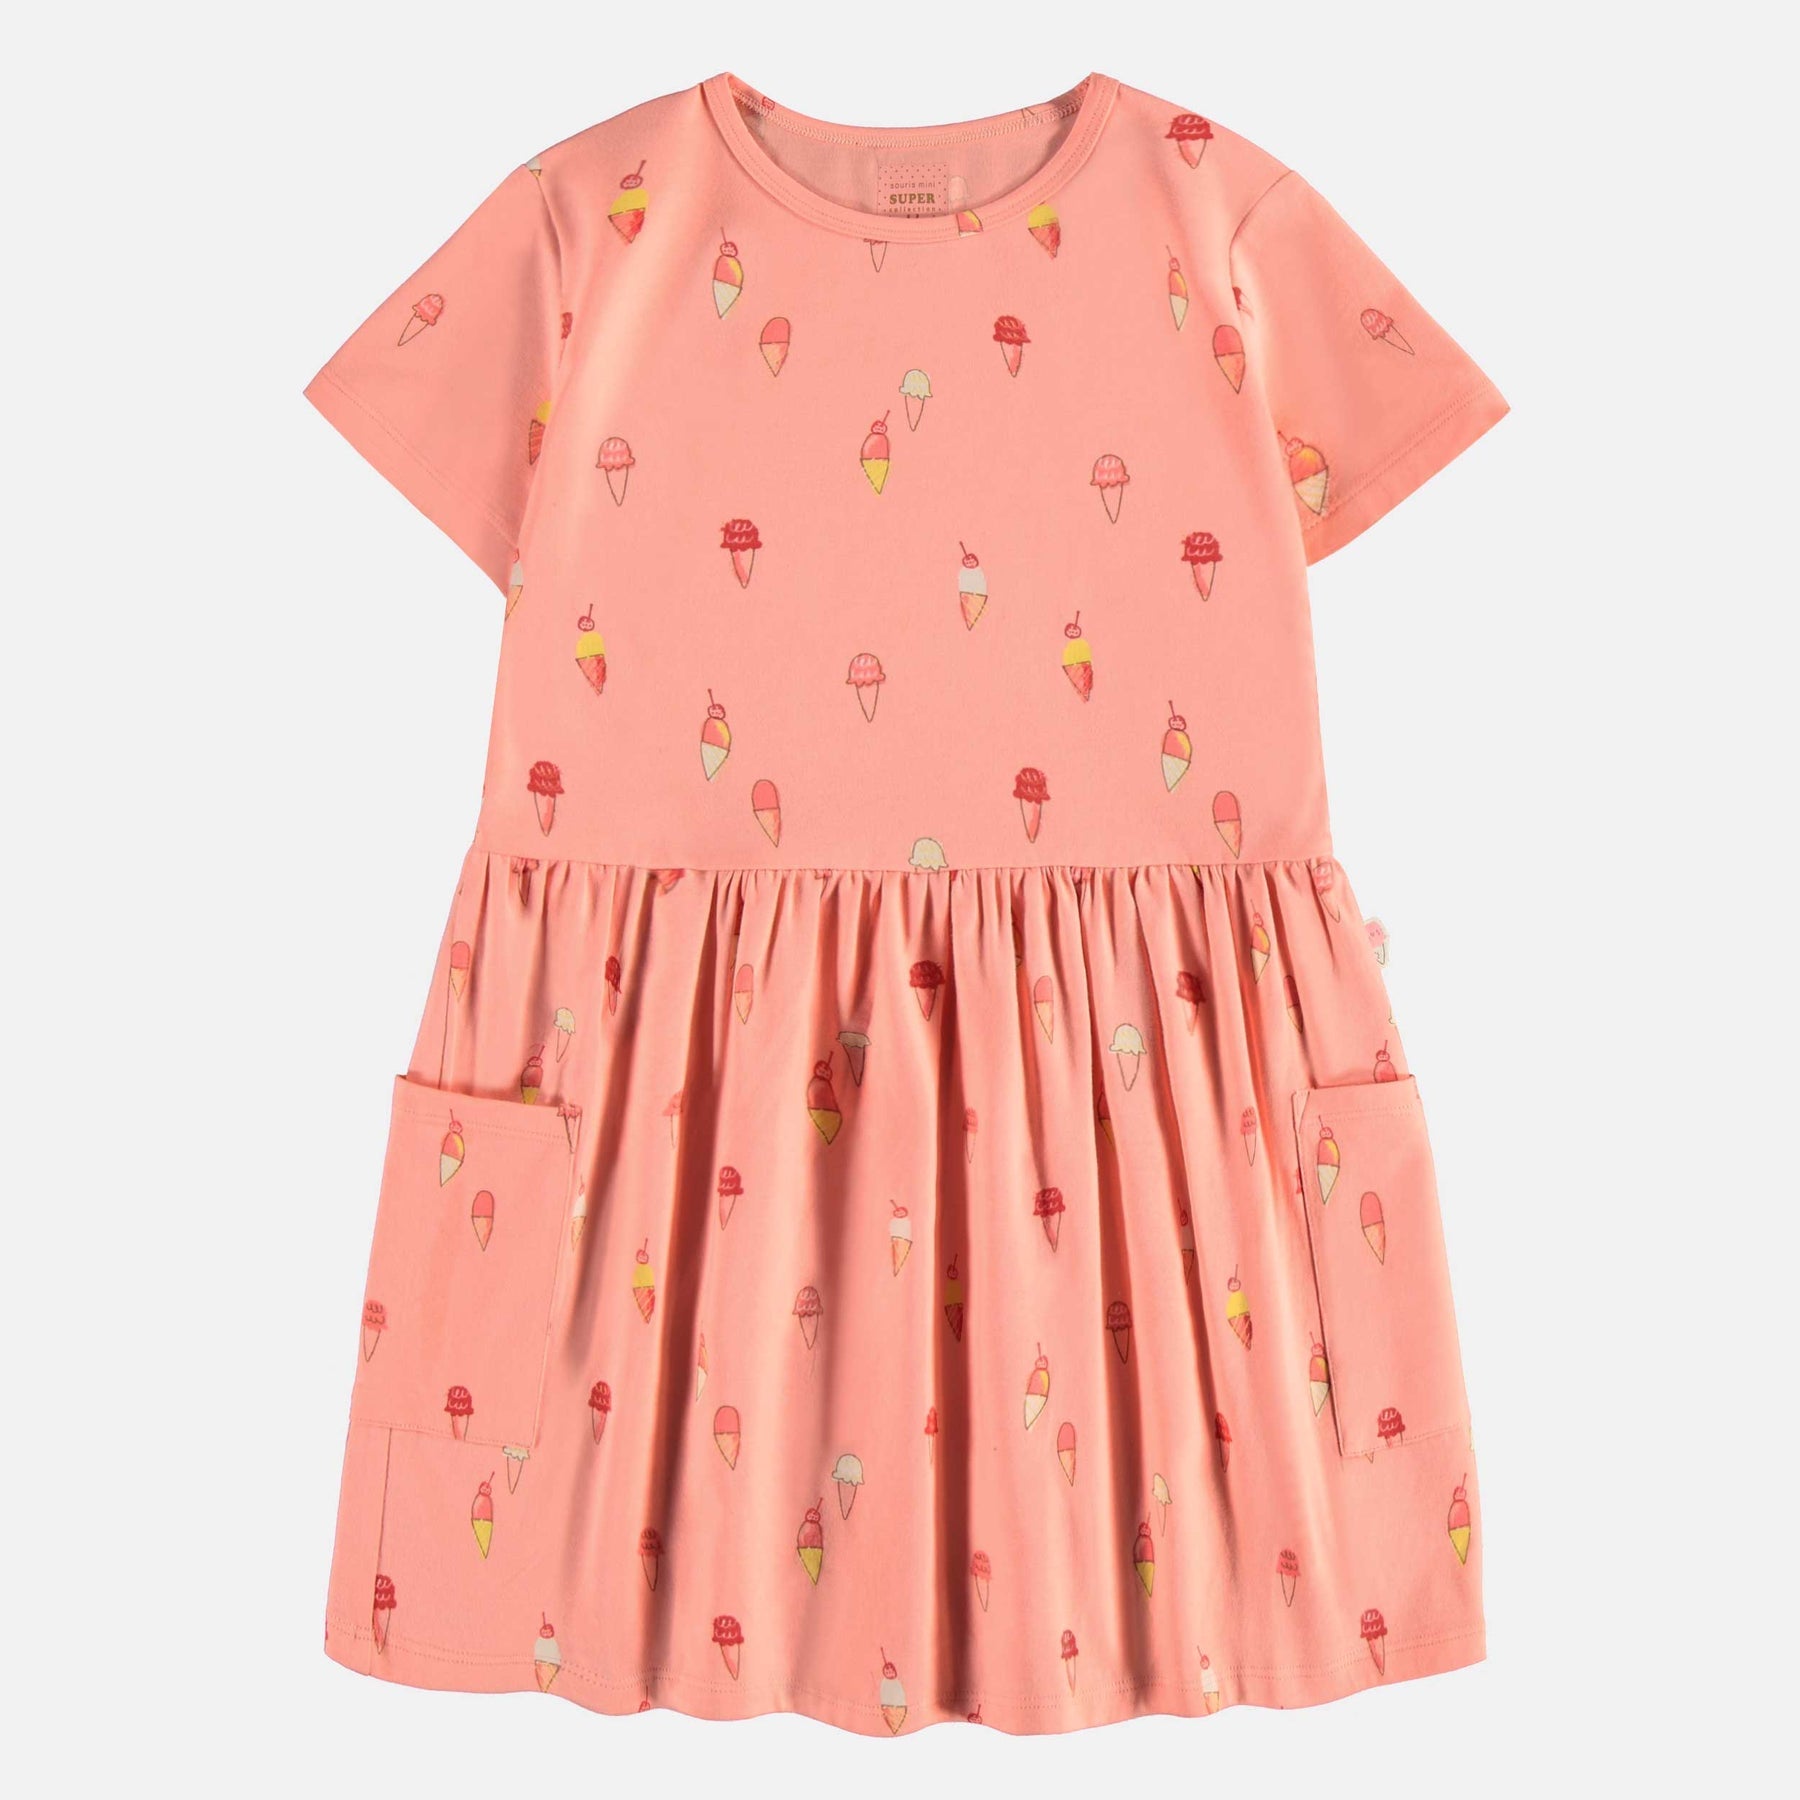 PINK SHORT SLEEVED DRESS WITH ICE CREAM PRINT COTTON, CHILD